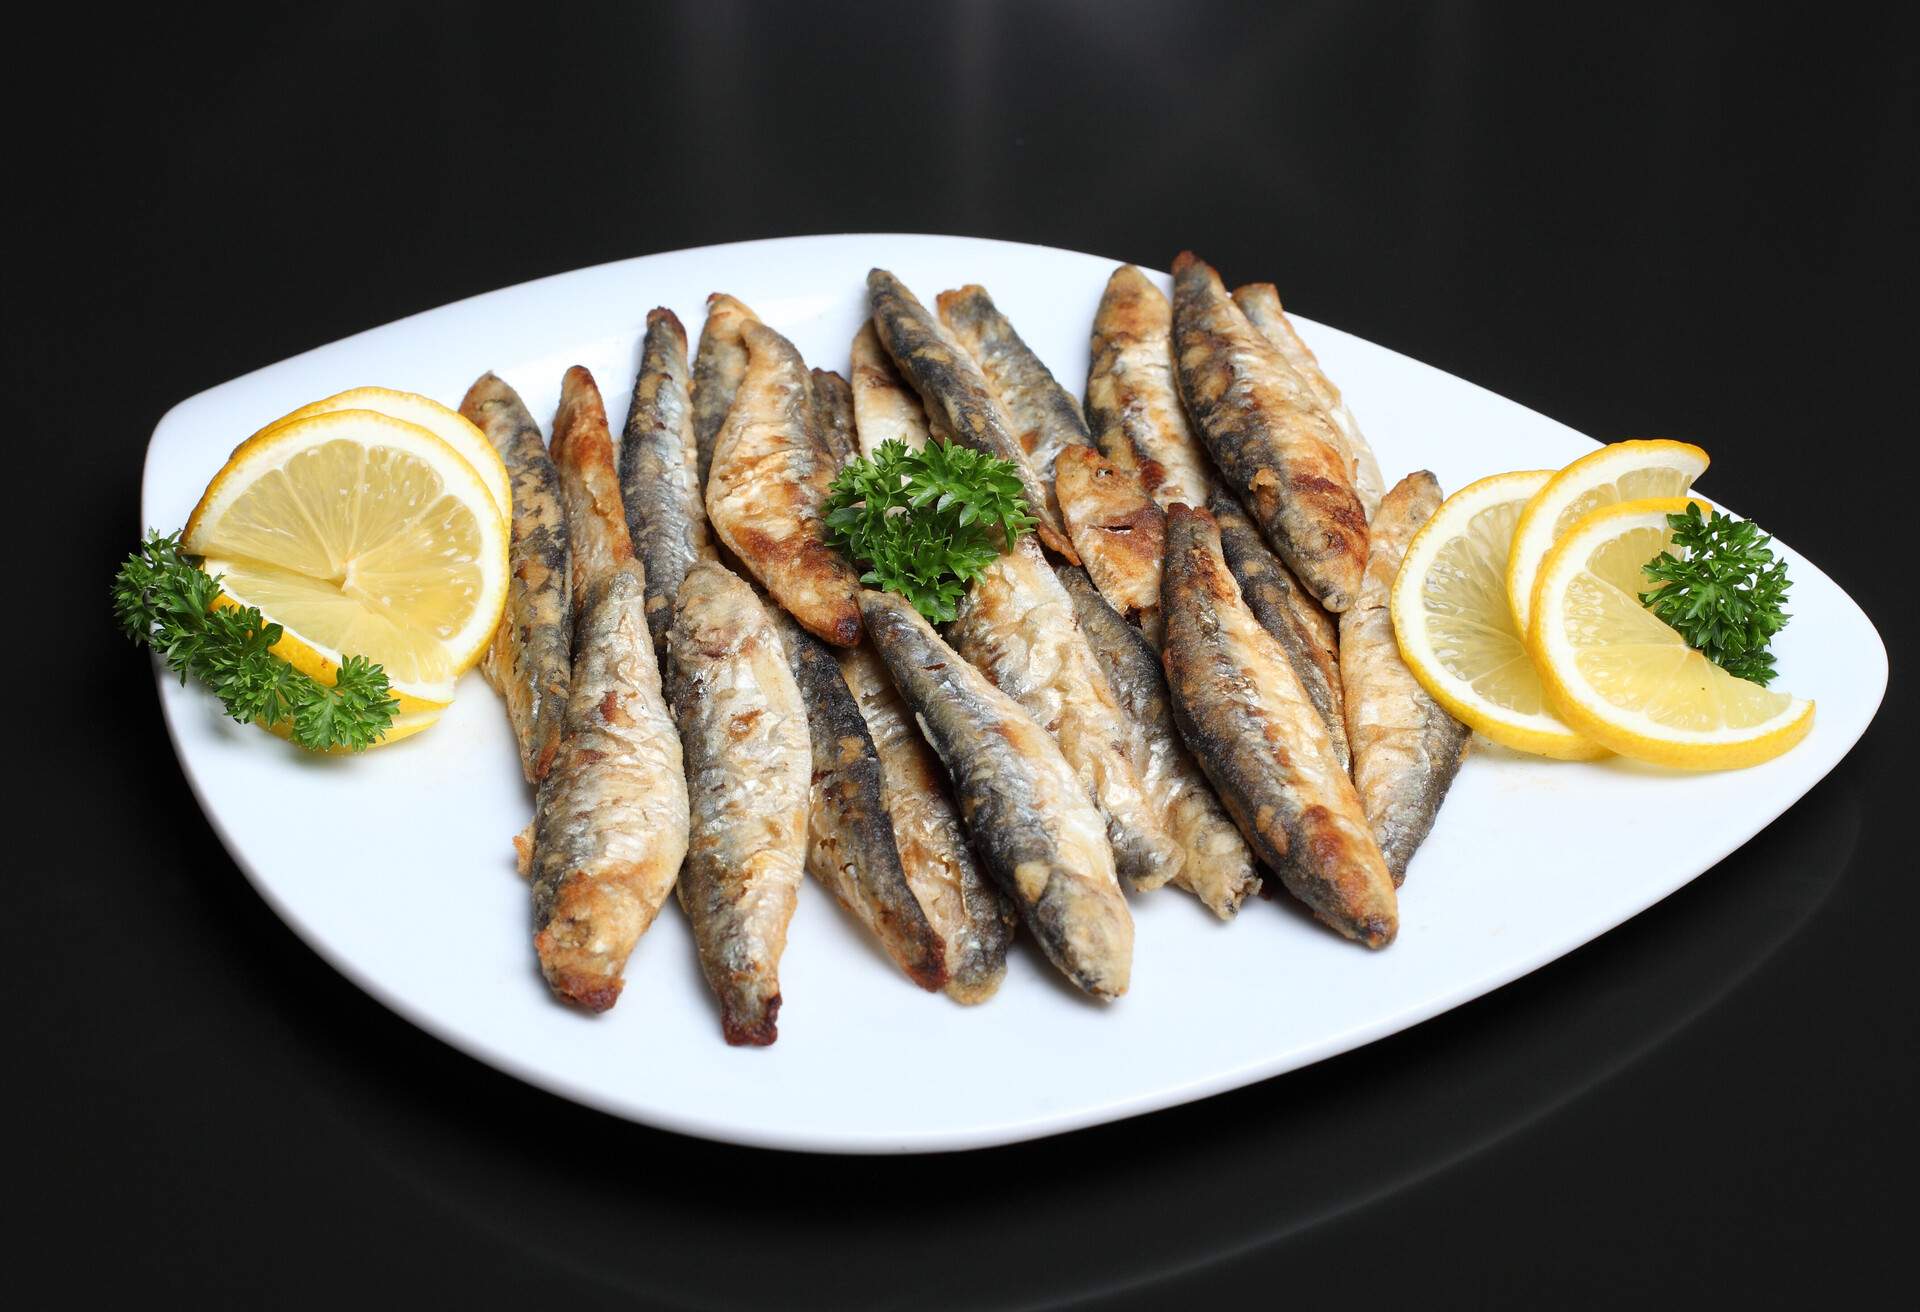 Fried anchovies with lettuce salad and lemon in a dish